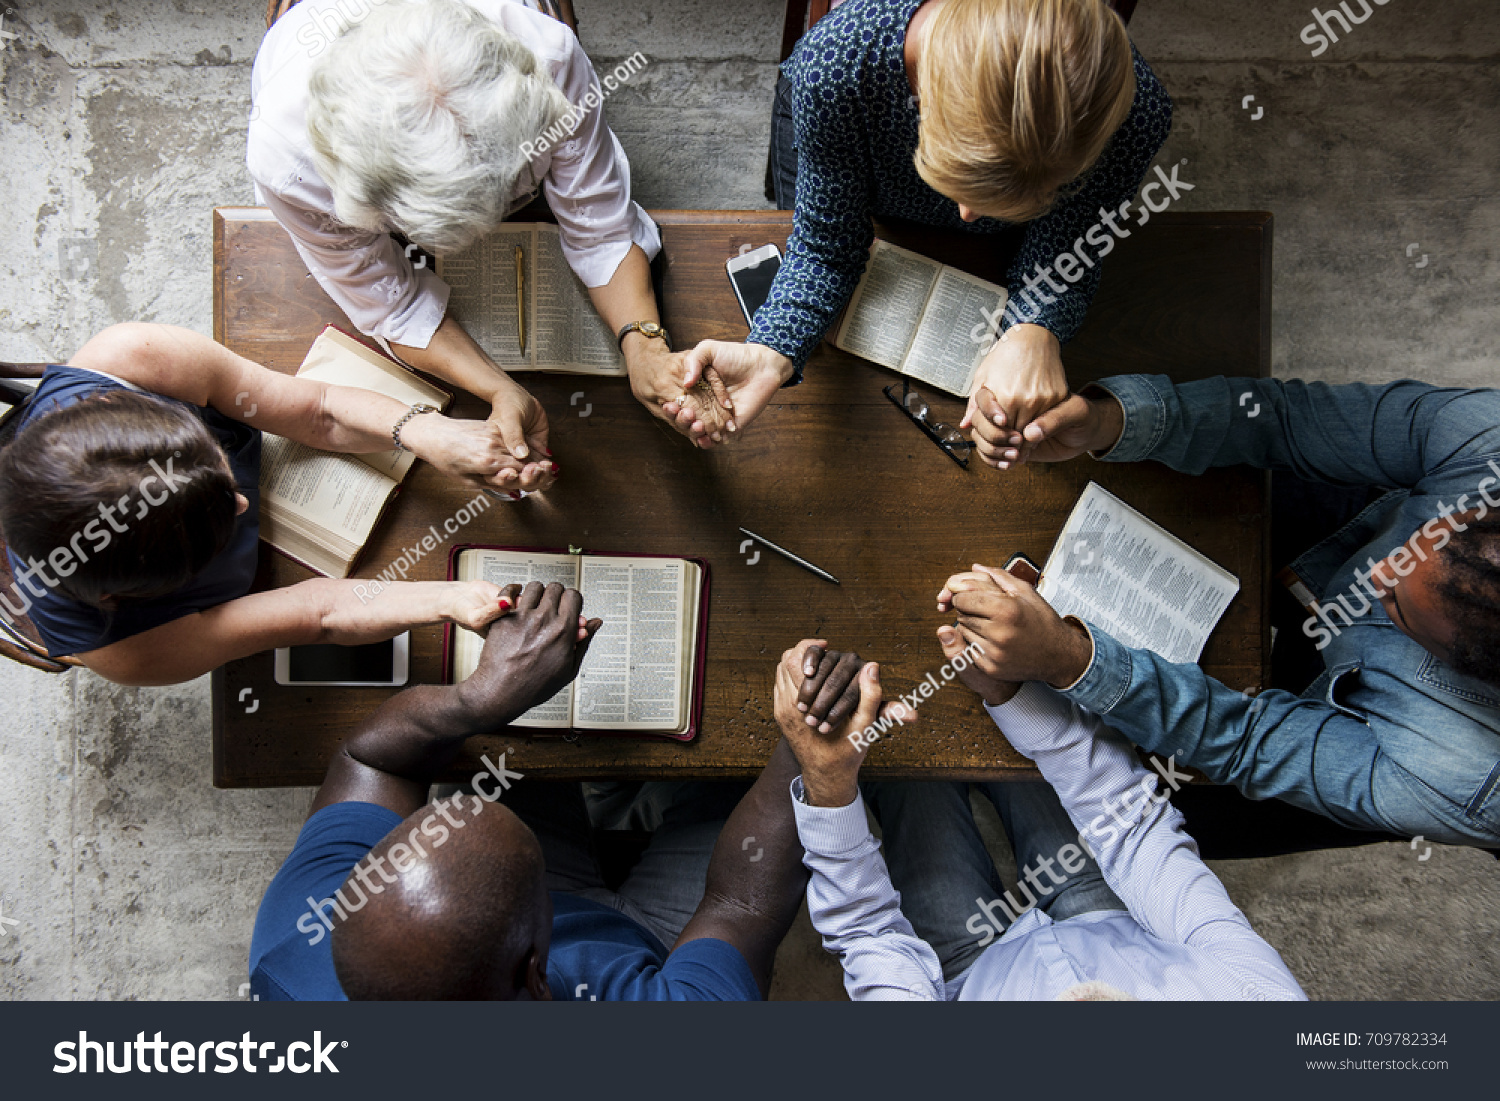 Group of people holding hands praying worship believe #709782334